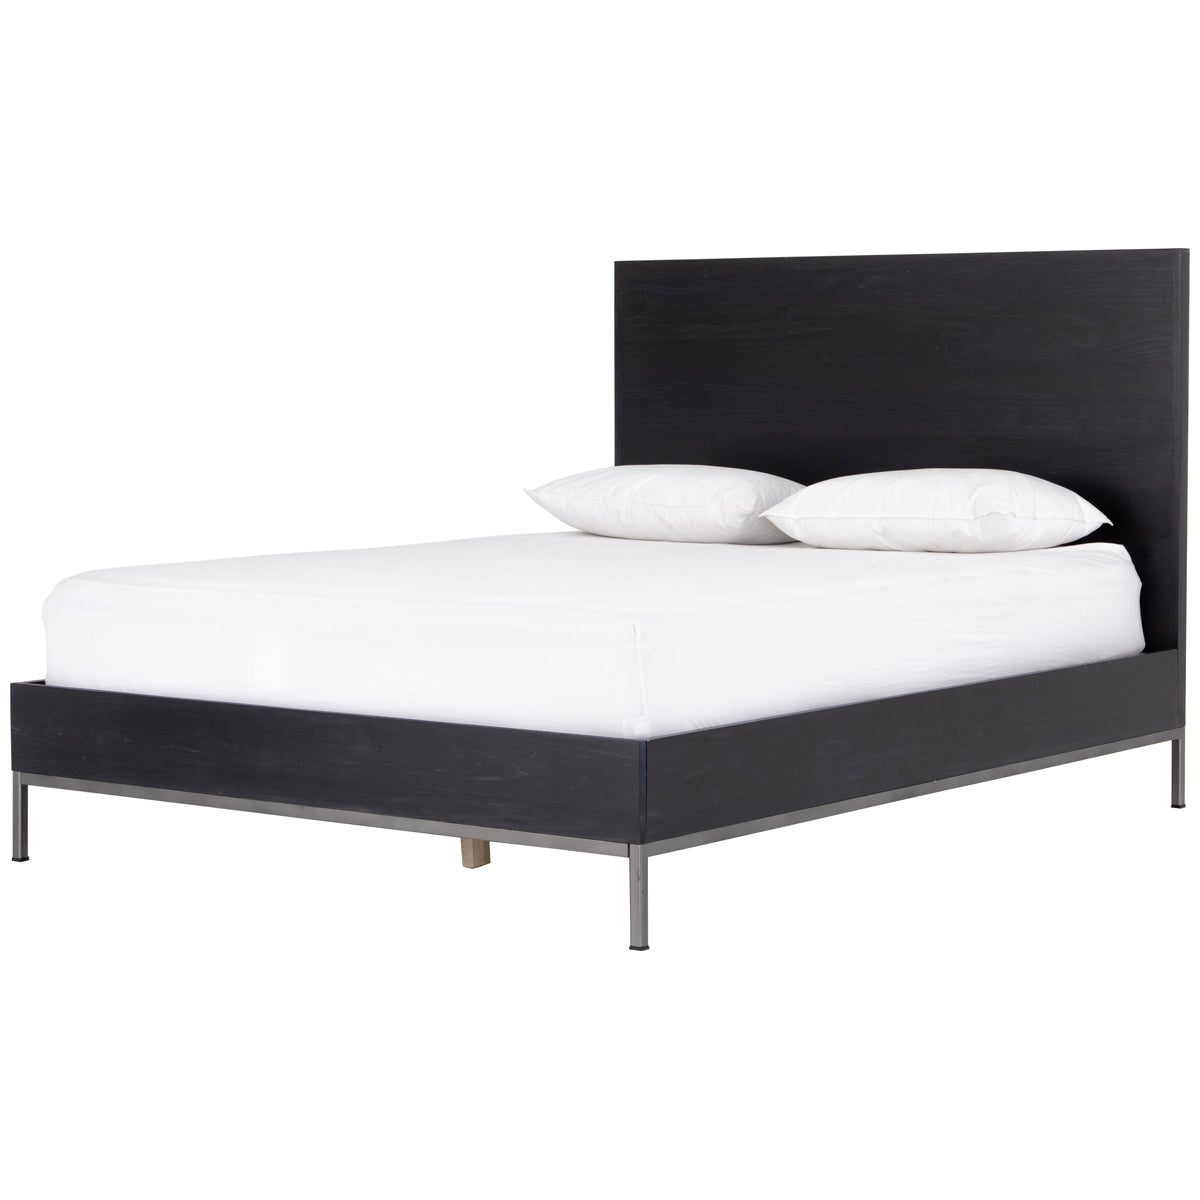 Four Hands Fulton Trey Bed